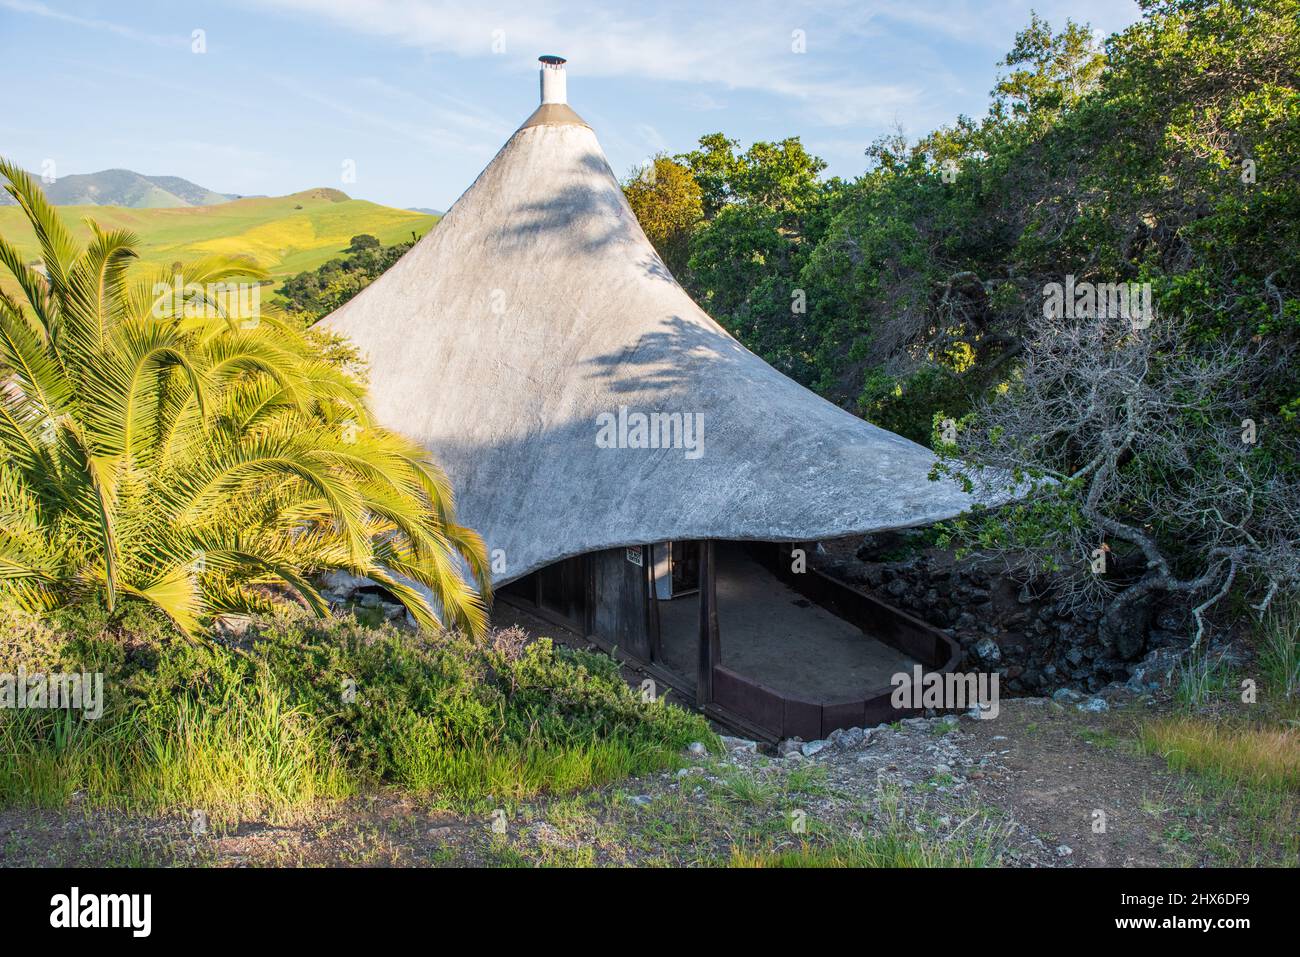 San Luis Obispo, CA /USA - April 2, 2016: Exterior of Shell House at Cal Poly Architecture Graveyard. Stock Photo